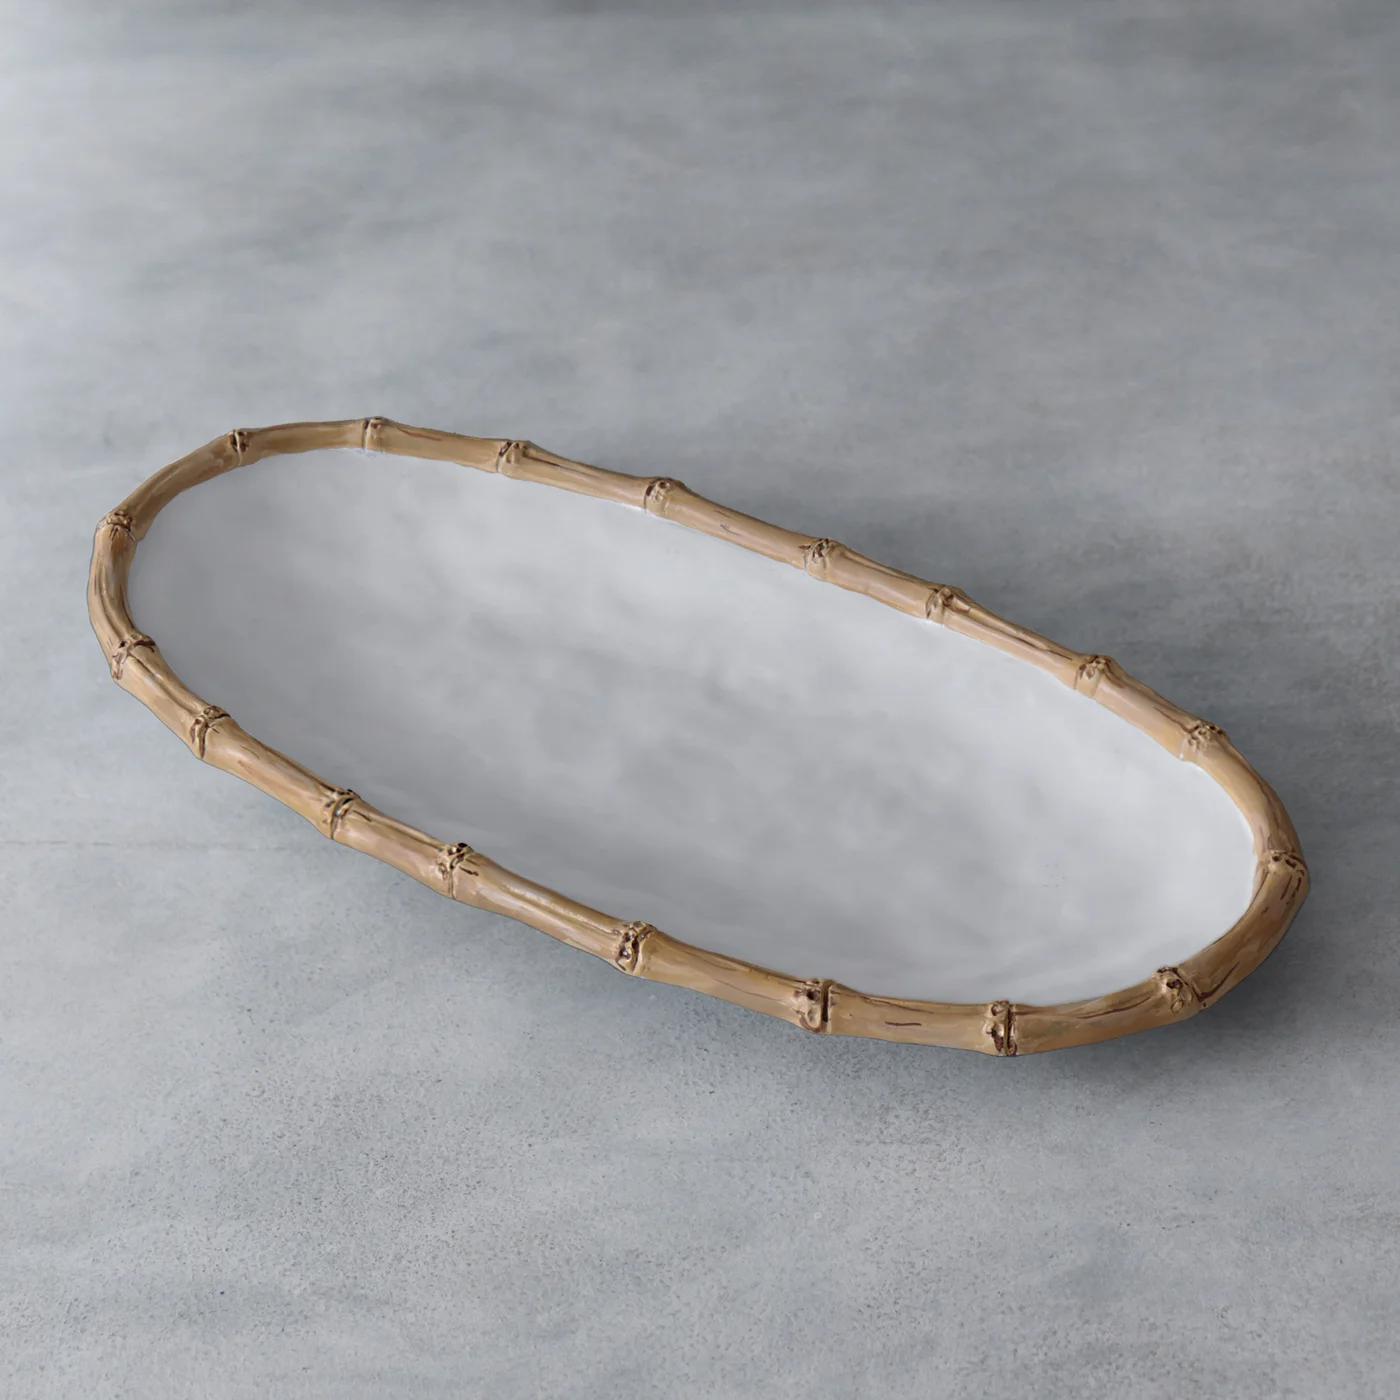 Beatriz Ball Vida Bamboo Oval Platter-Home/Giftware-WHITE AND NATURAL-M-Kevin's Fine Outdoor Gear & Apparel